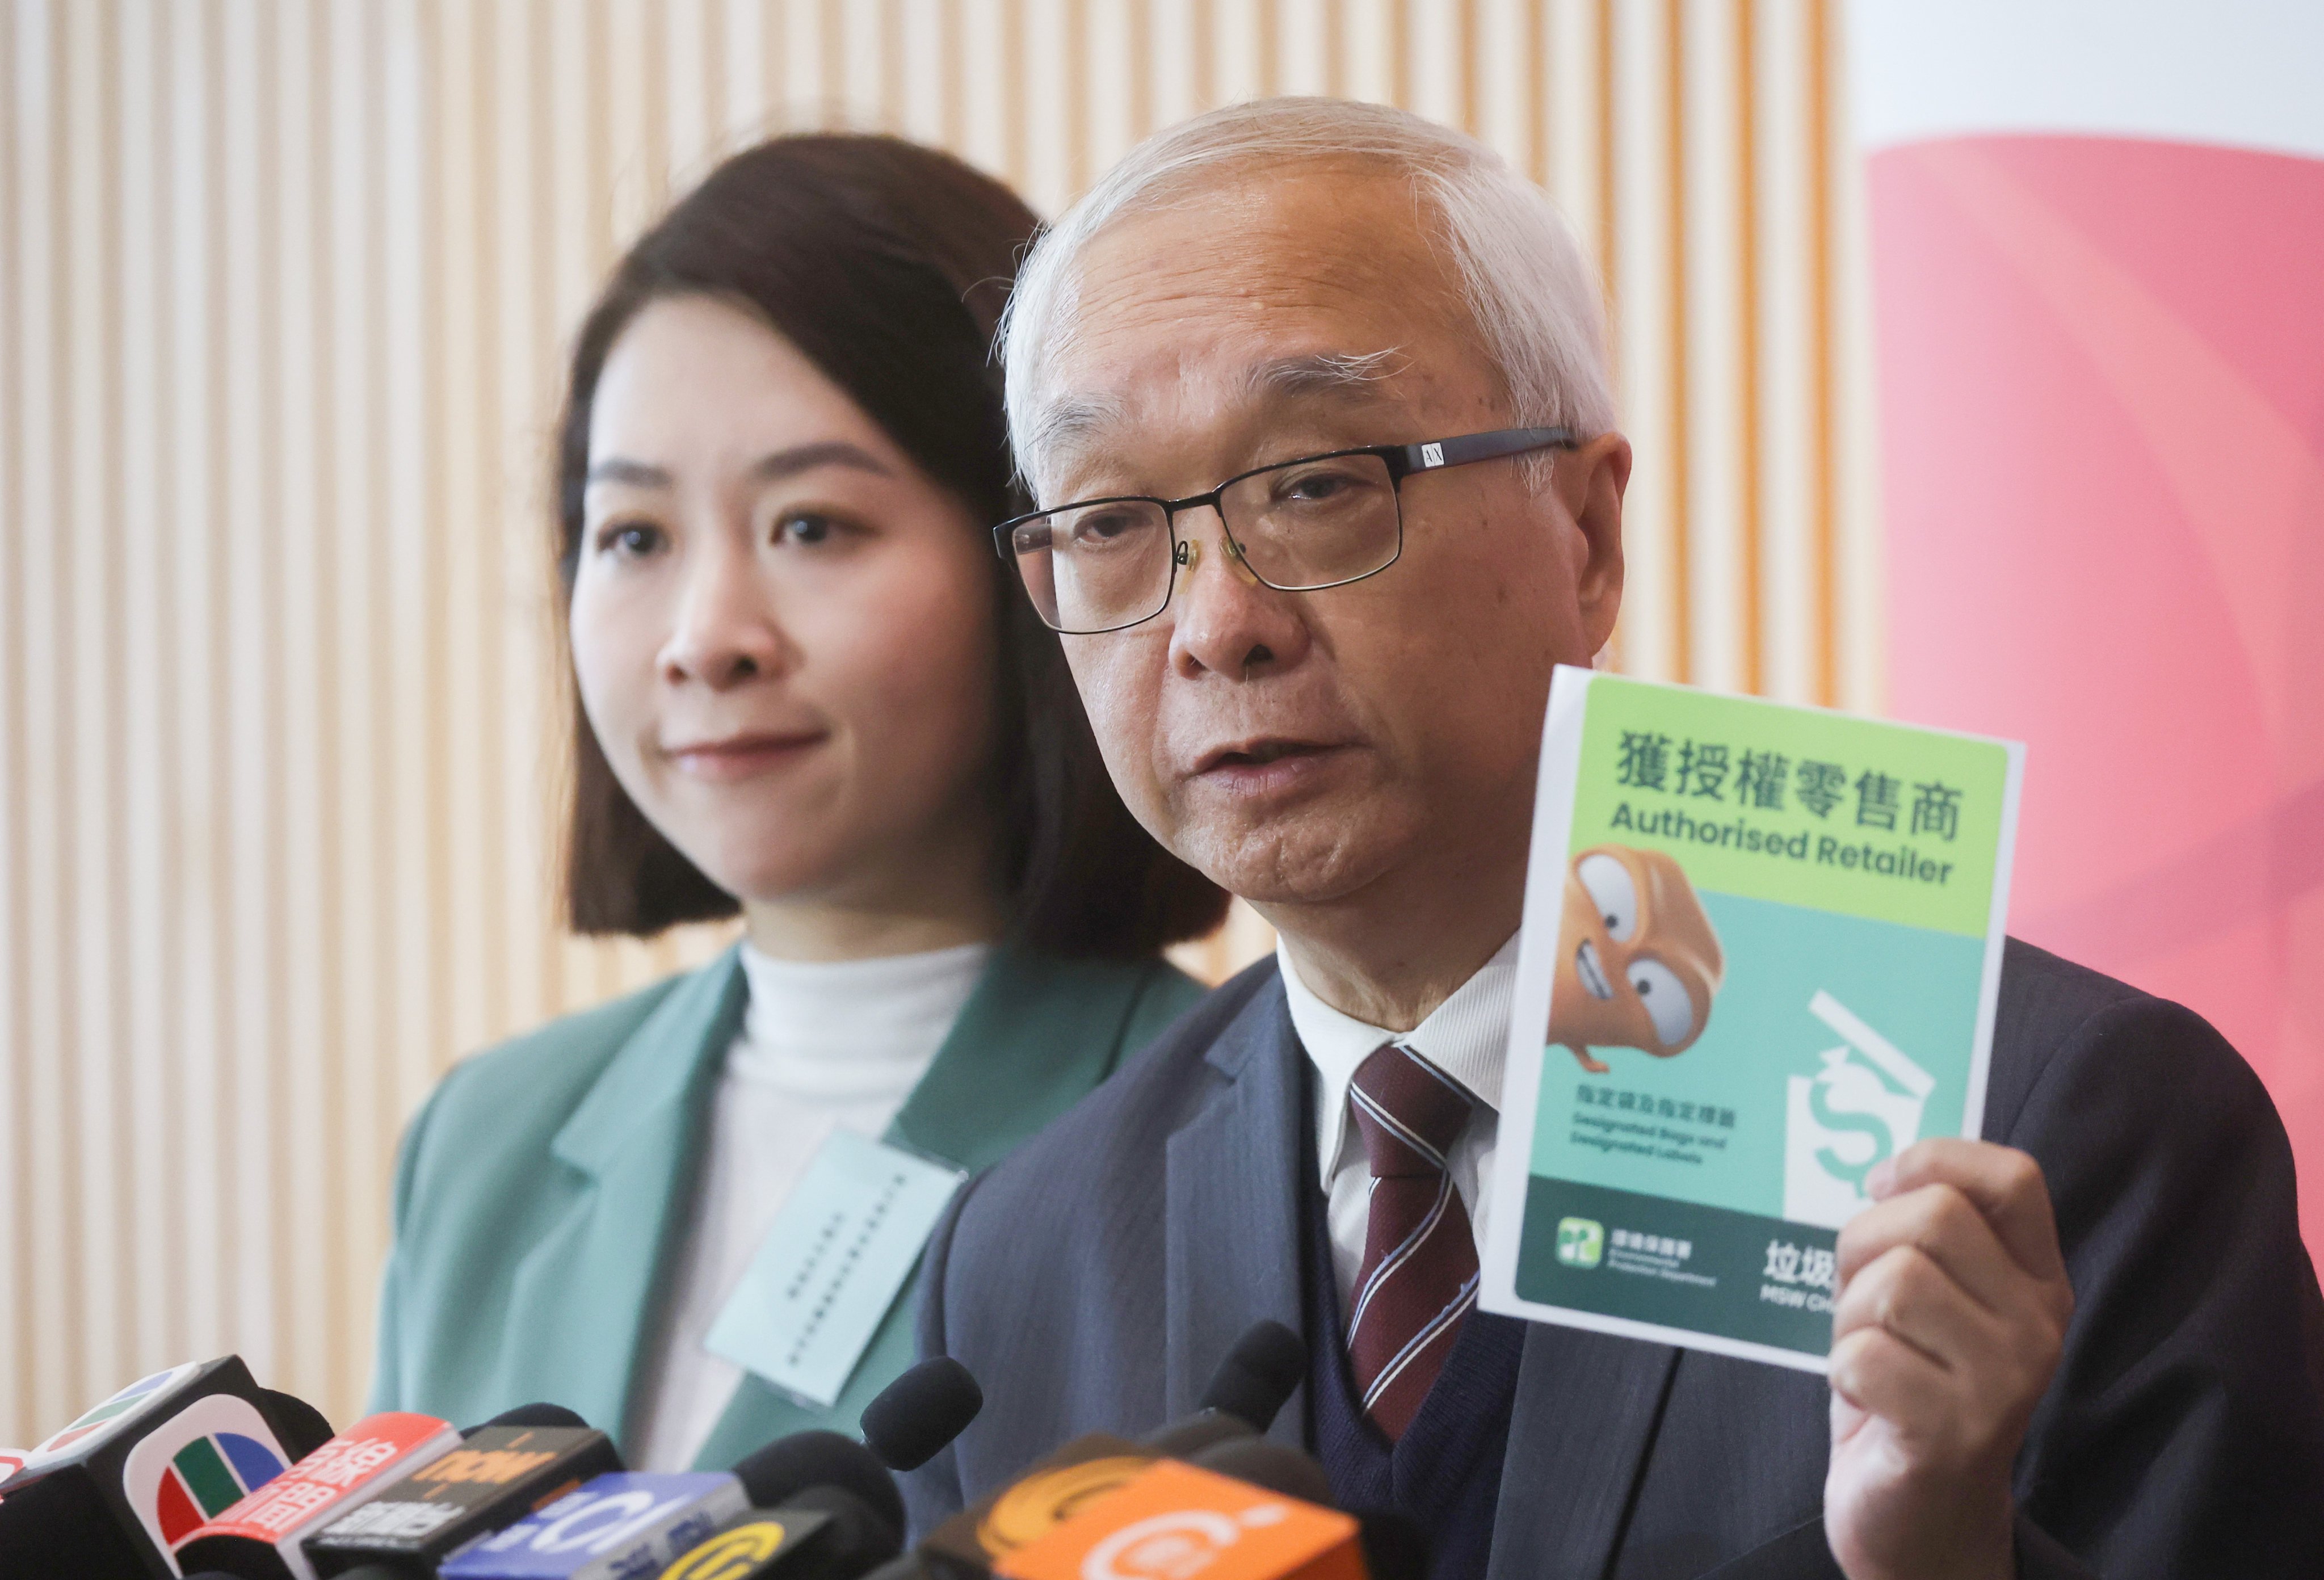 Kwai Tsing District Council member Jody Kwok Fu-yung (left) and Secretary for Environment and Ecology Tse Chin-wan meet the media after a briefing on municipal solid waste charging, at the government headquarters in Tamar on January 26. Tse has explained that the waste charging scheme is not about the money, but the way residents dispose of their rubbish. Photo: Edmond So